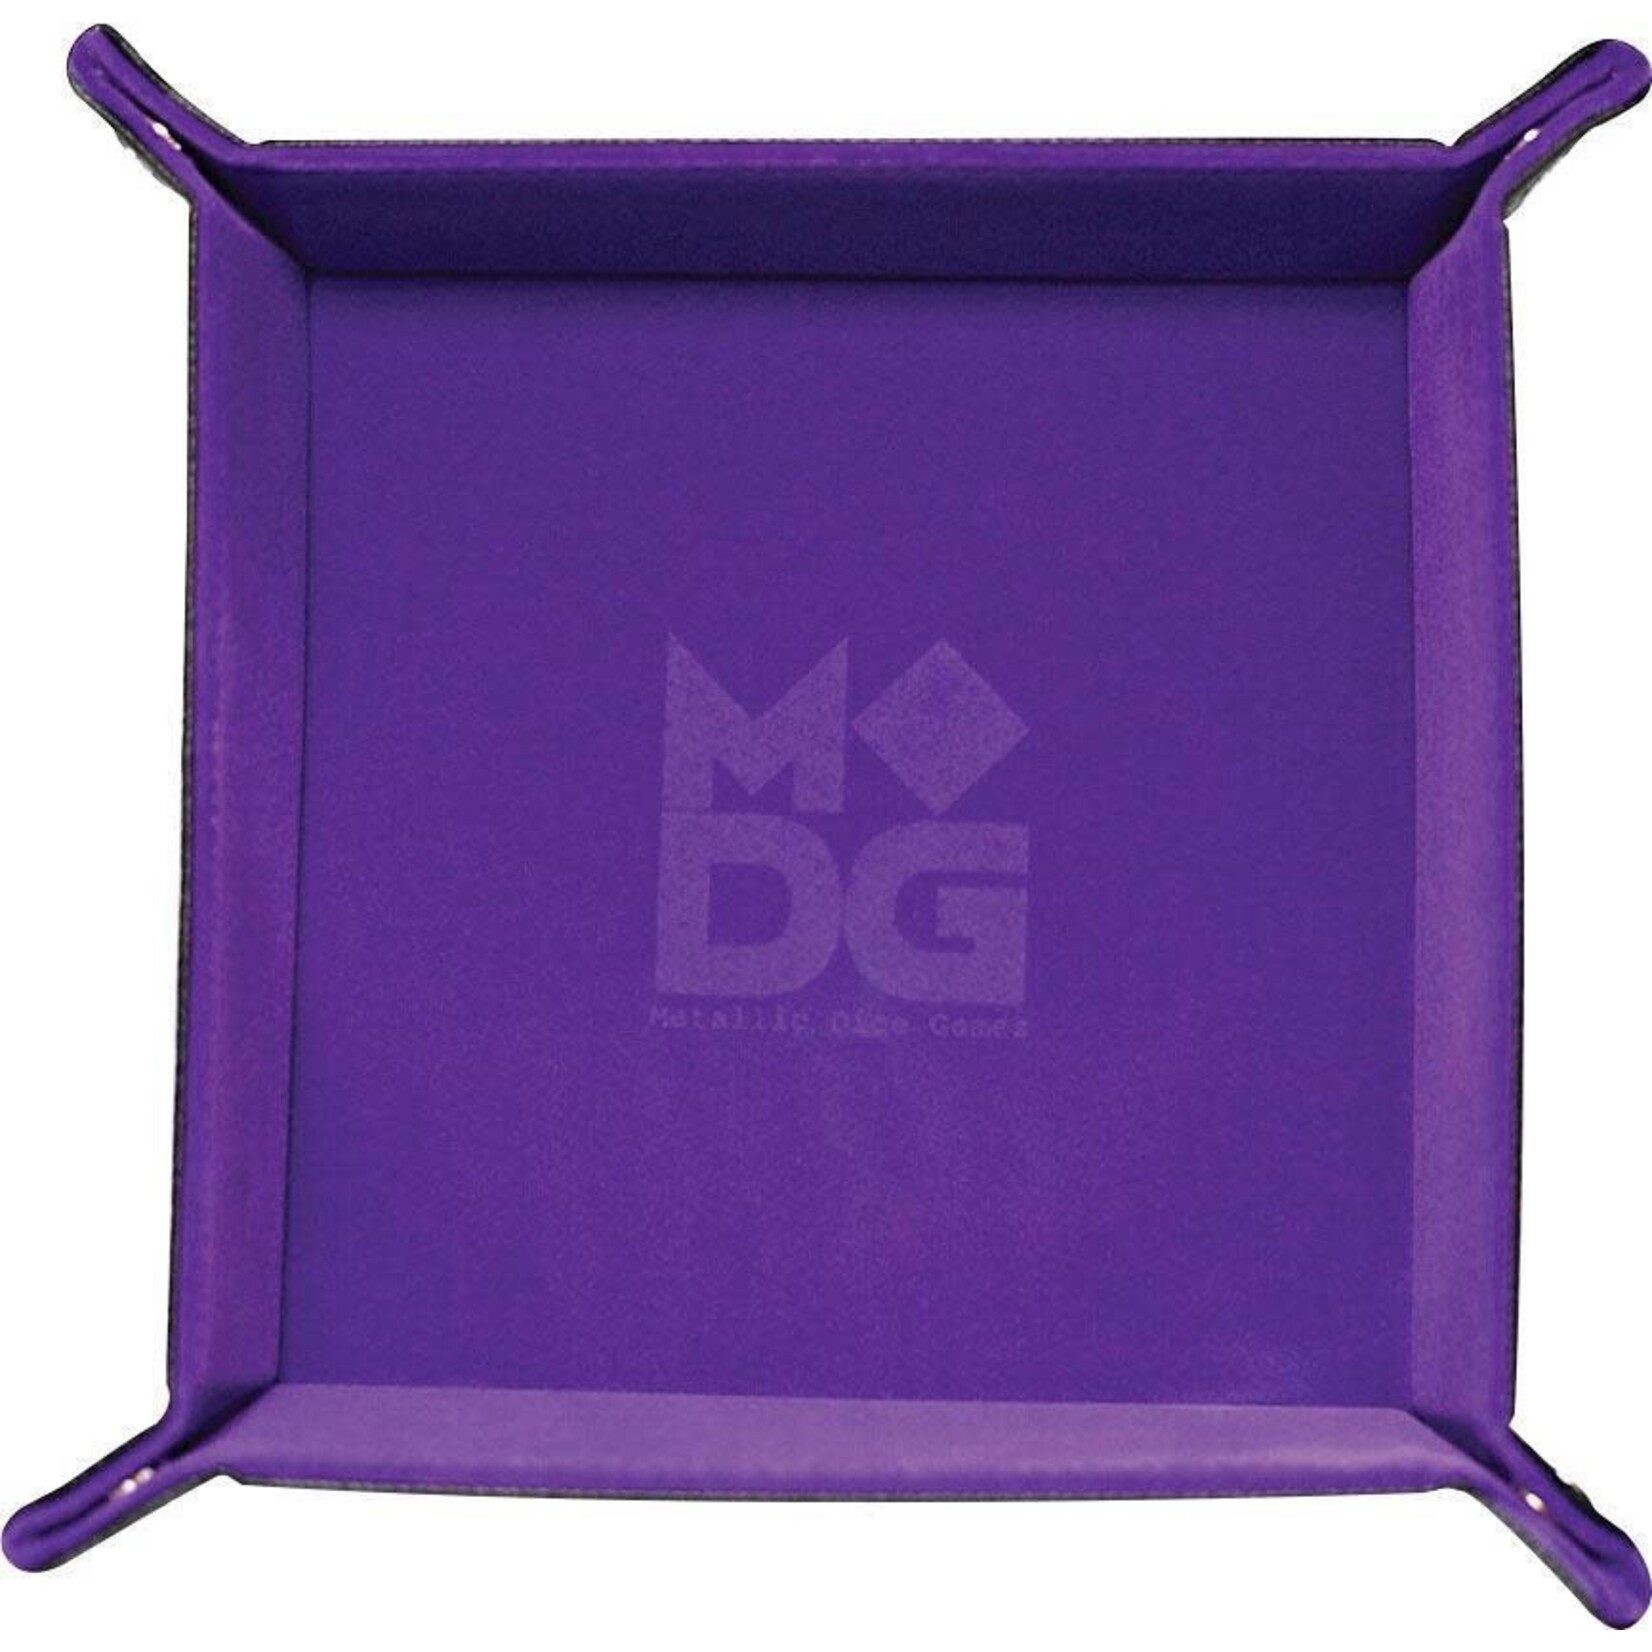 Metallic Dice Games Velvet Folding Dice Tray with Leather Backing: 10in x 10in Purple